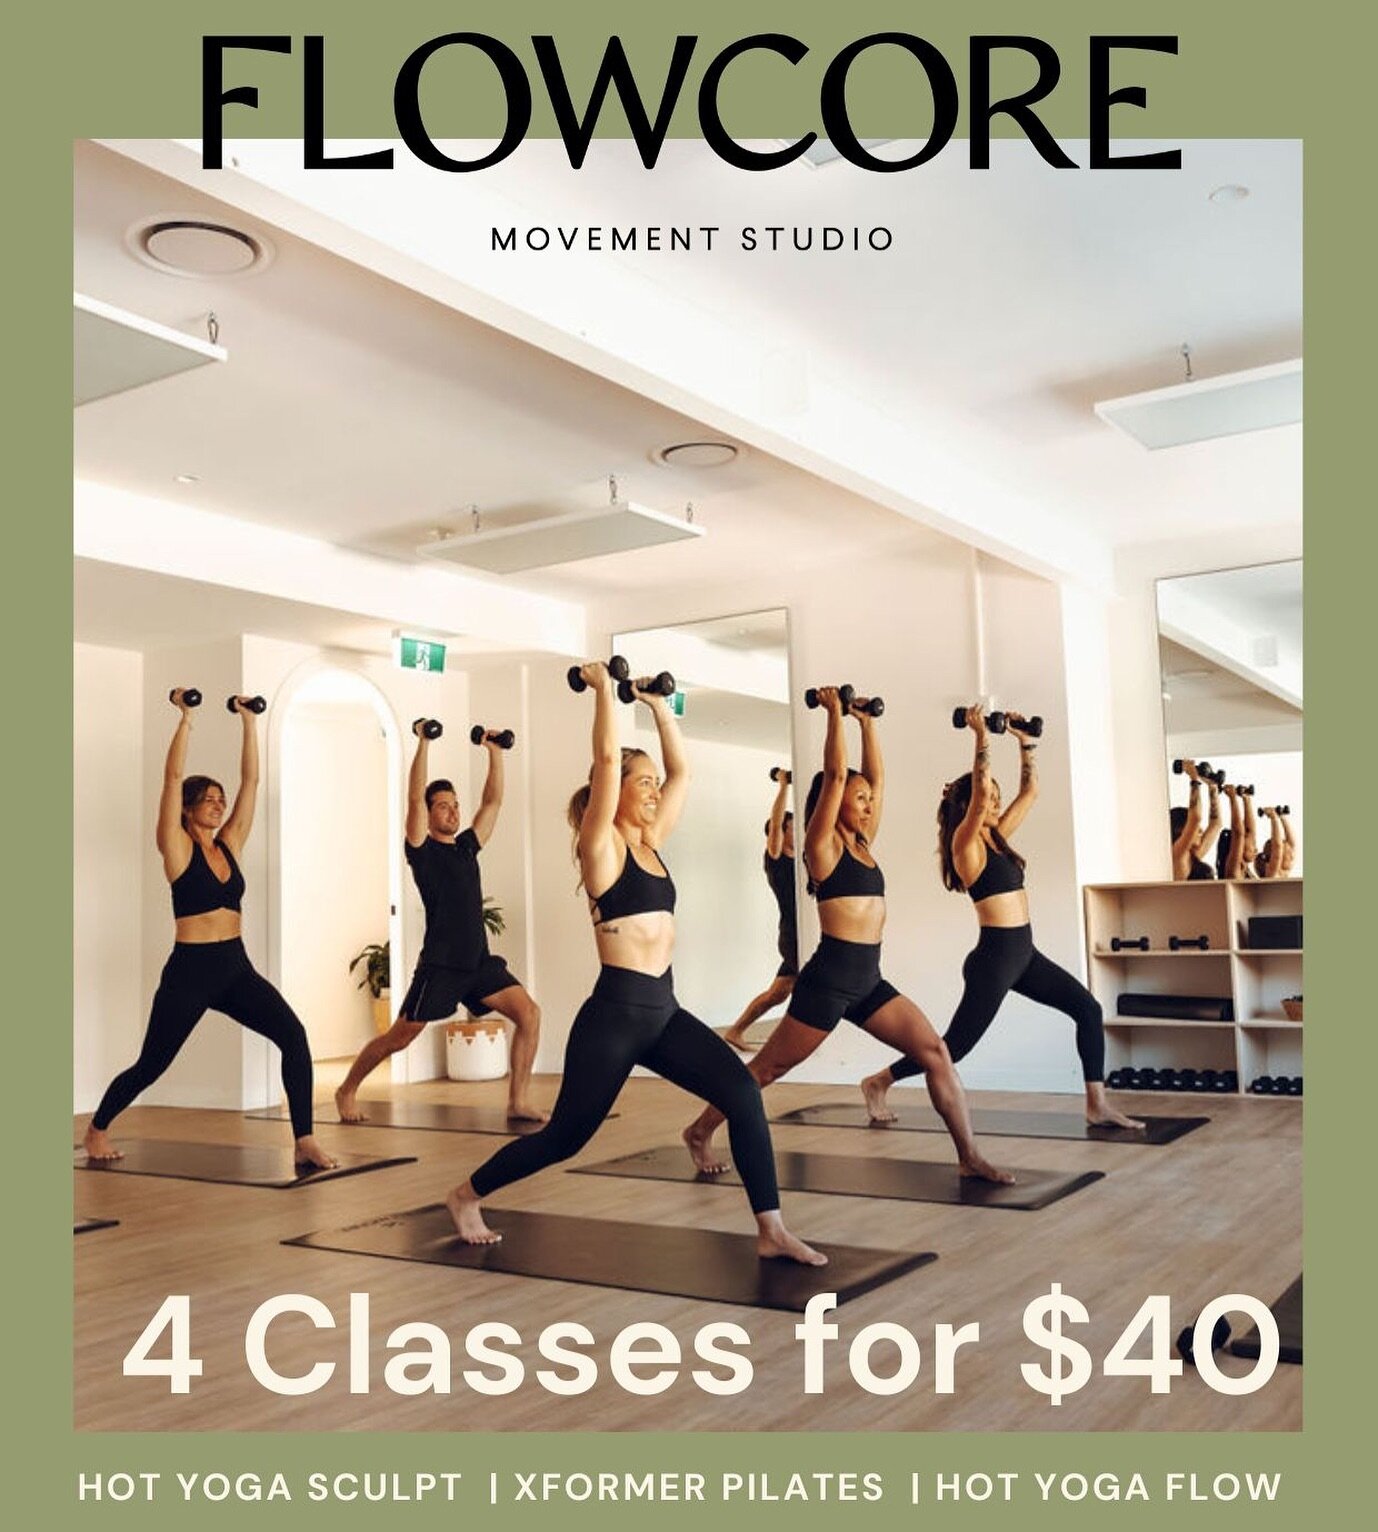 Our intro offer is still running - 4 classes for $40! April is the month to try something new, give it a go, you might just fall in love 🤍

Try all 3 of our classes - Hot Yoga Sculpt, XFormer Pilates and Heated Yoga Flow!